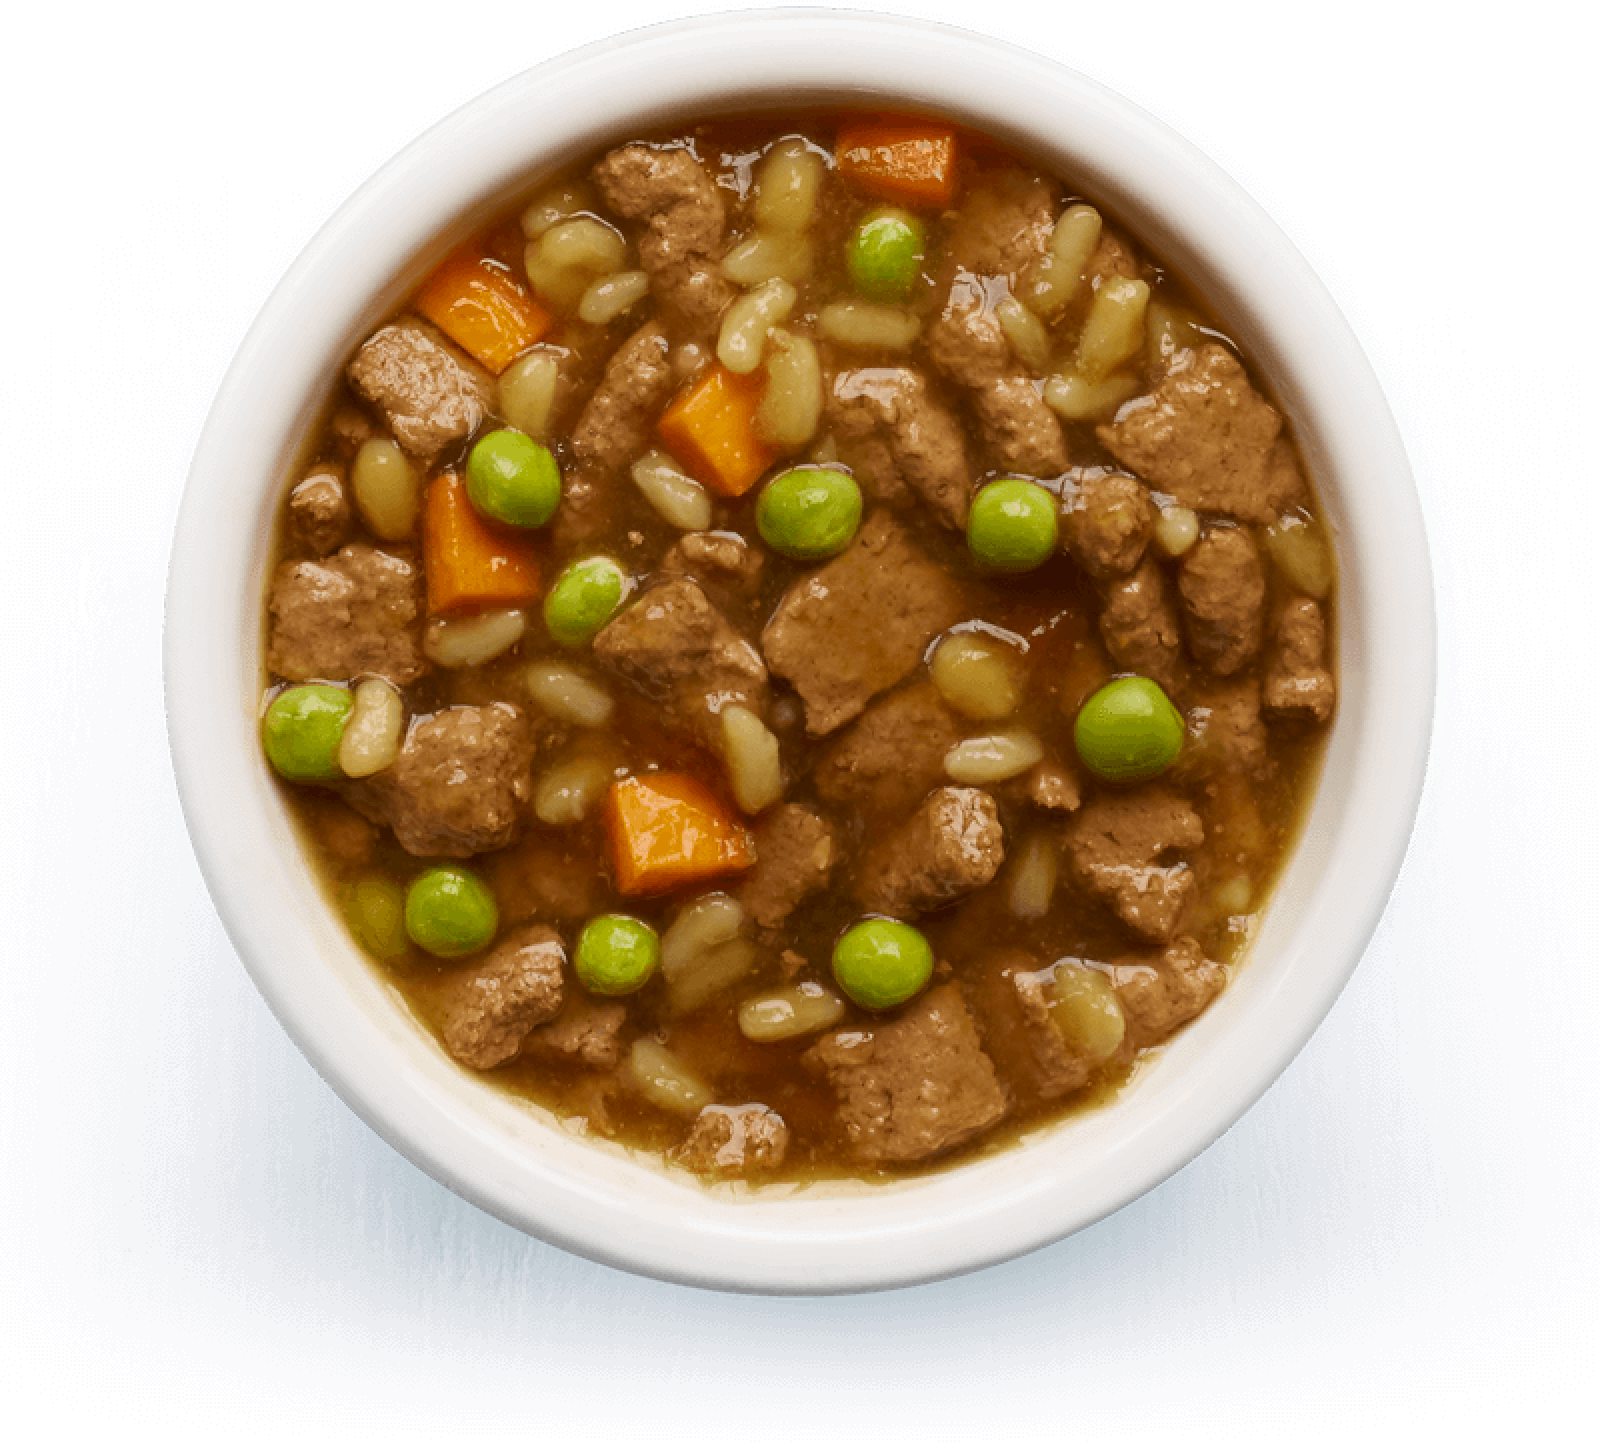 An image of Tails wet food. Slow-cooked stew with beef, rice & vegetables in tasty gravy